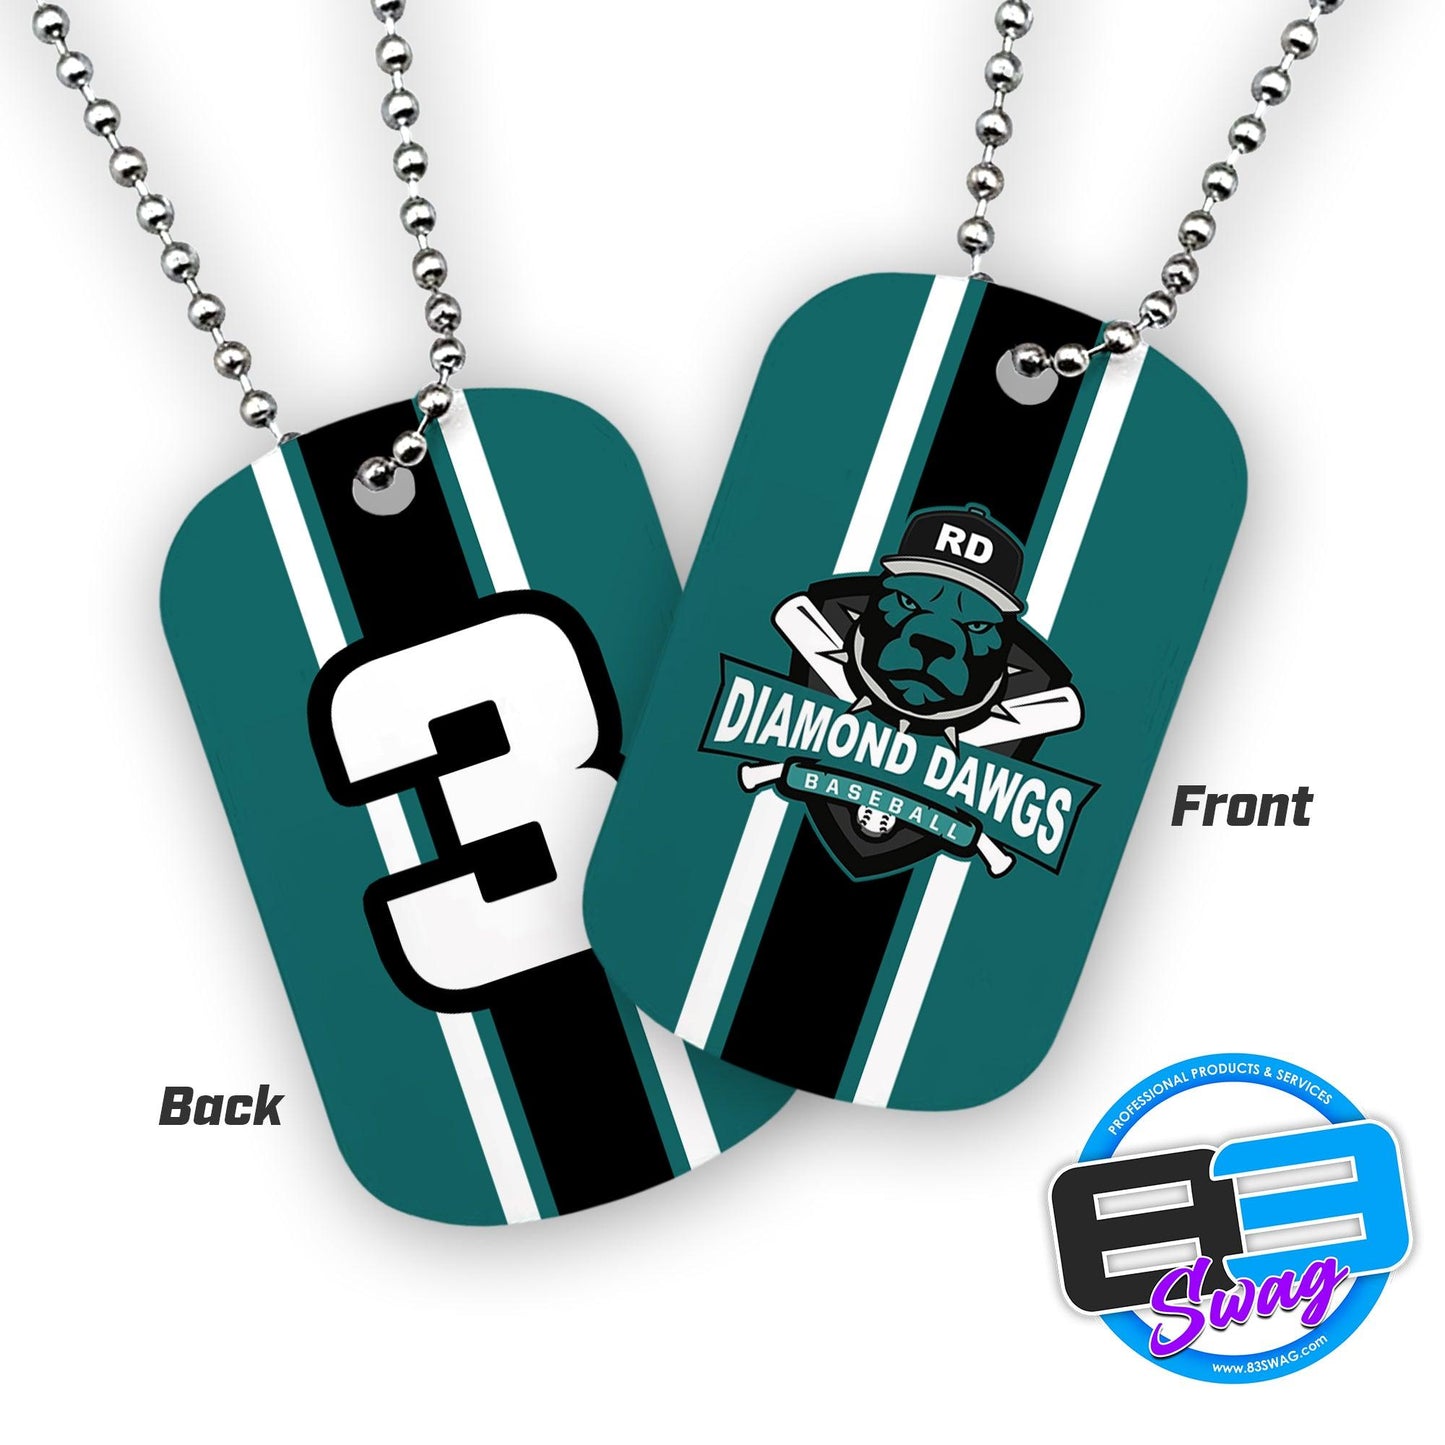 Double Sided Dog Tags - Includes Chain - Diamond Dawgs - 83Swag